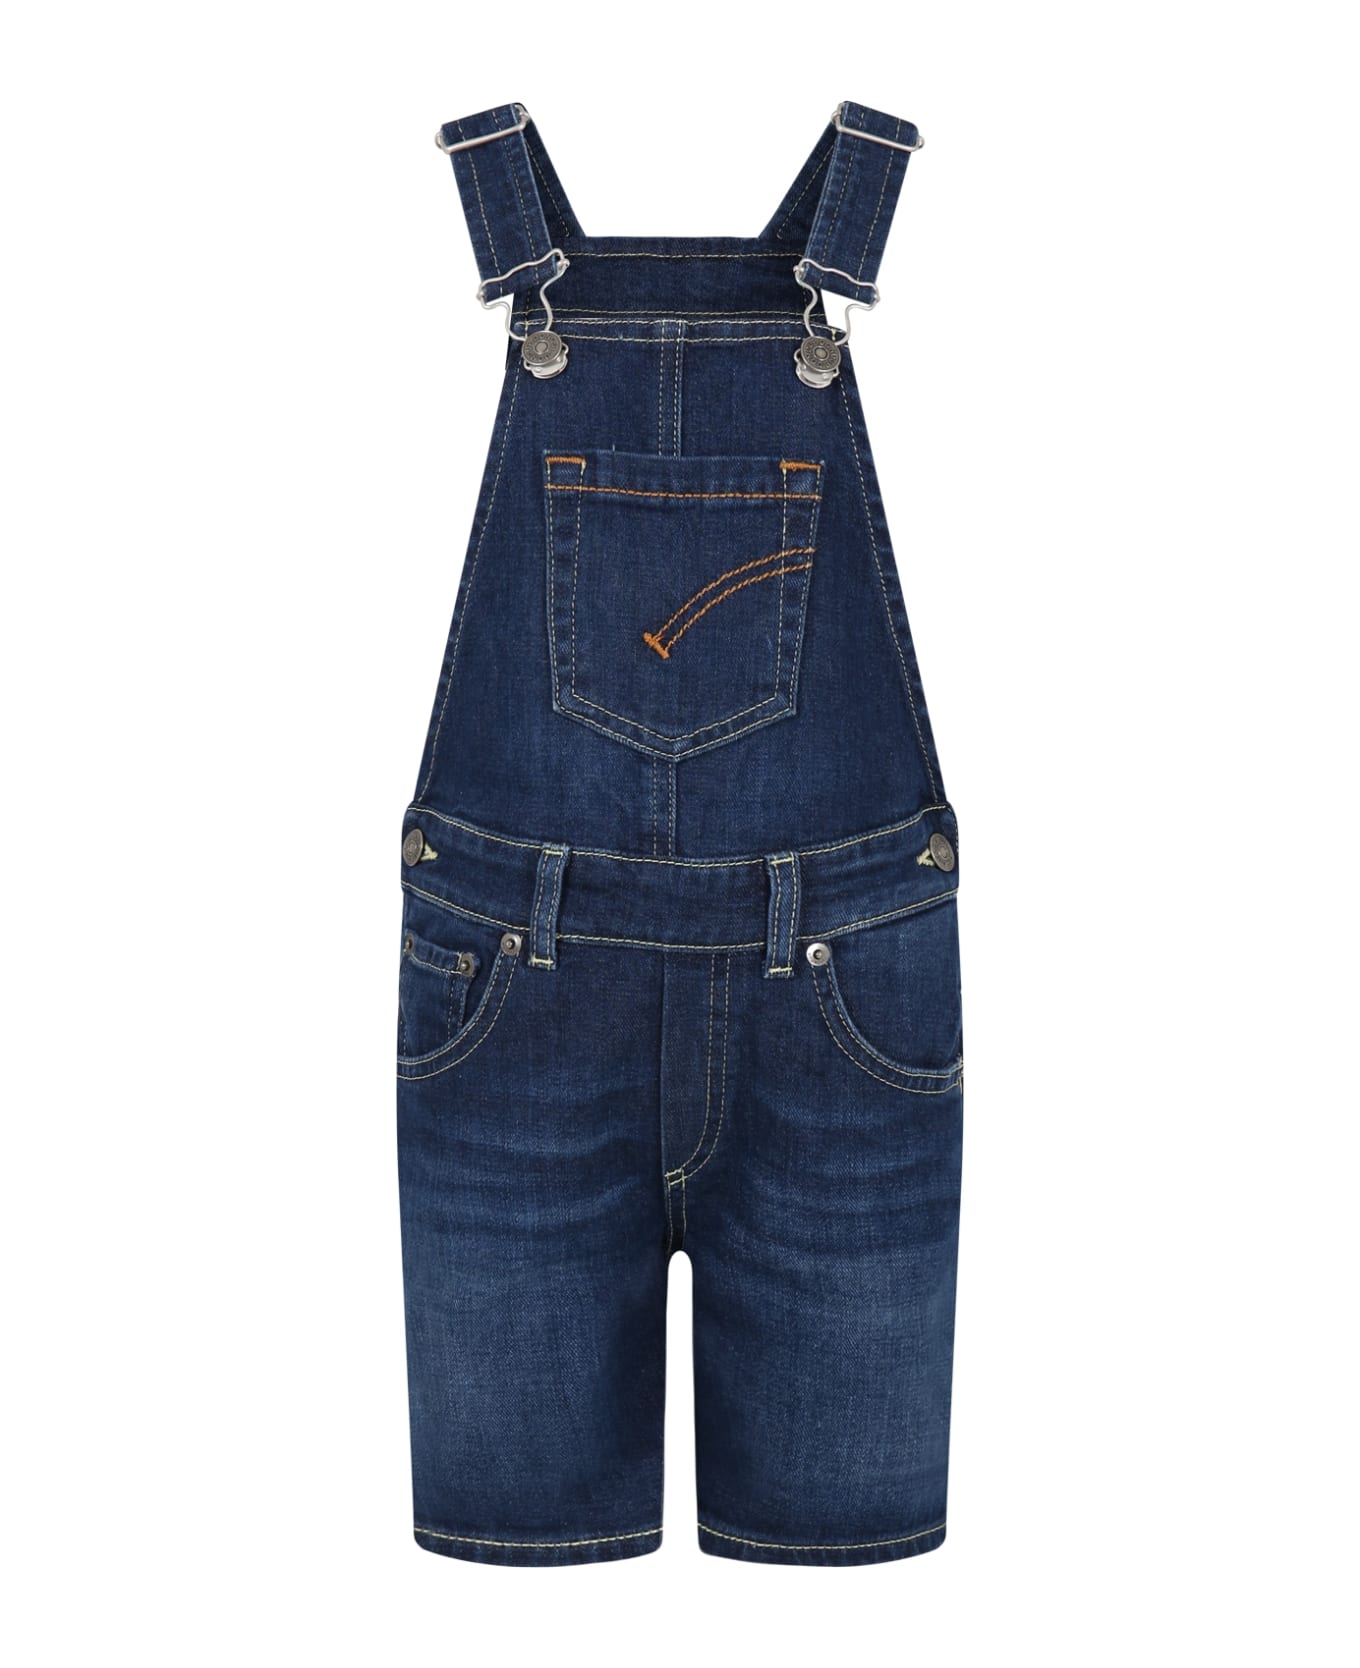 Dondup Blue Dungarees For Boy With Logo - Denim